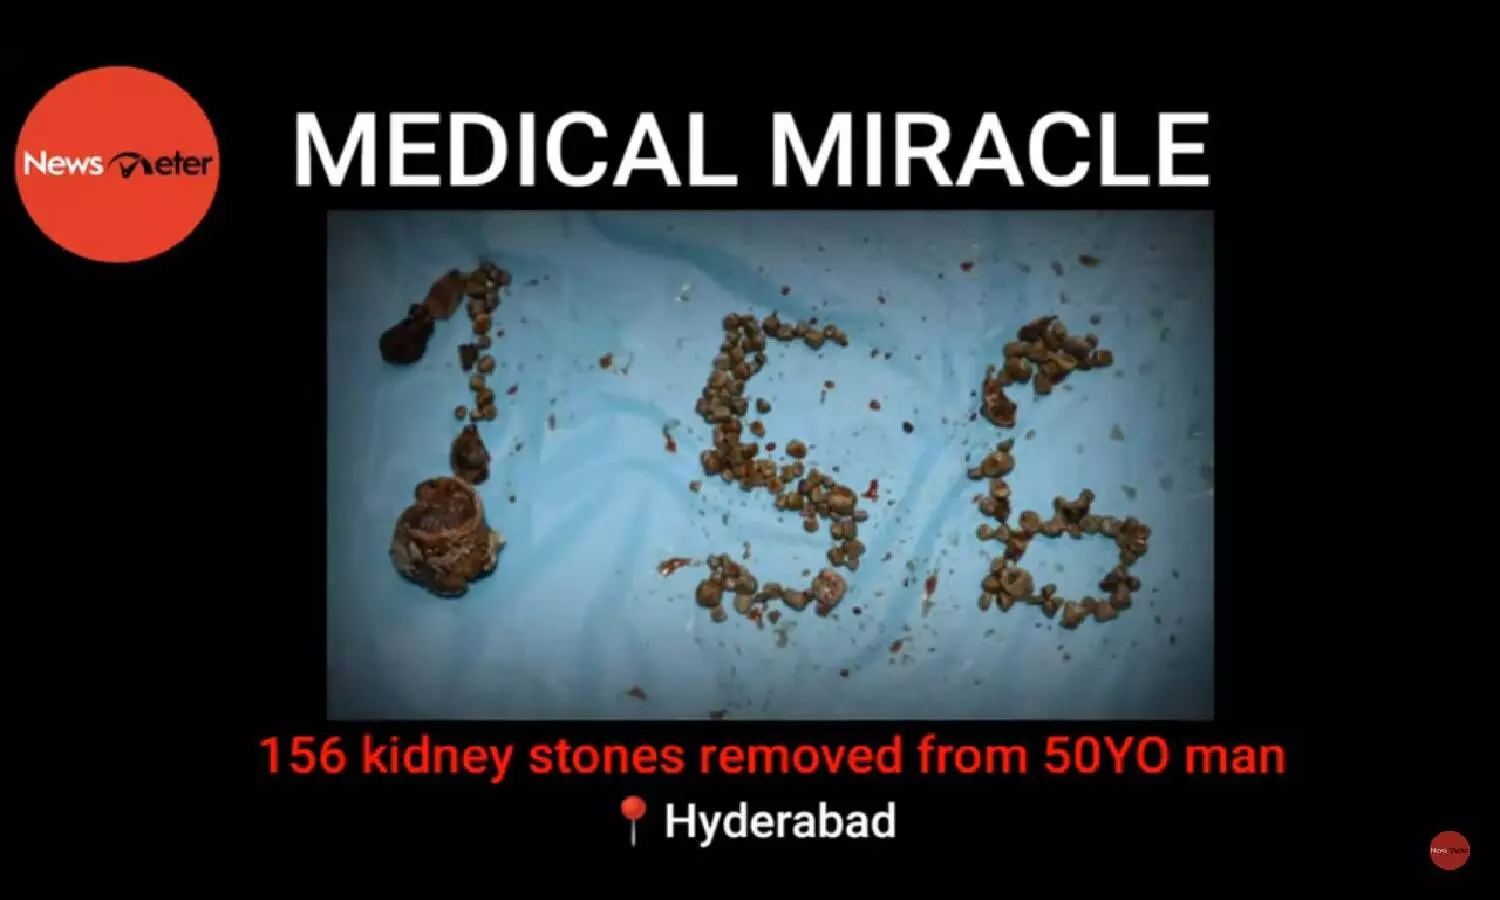 Medical Miracle: 156 kidney stones removed from 50YO man in Hyderabad